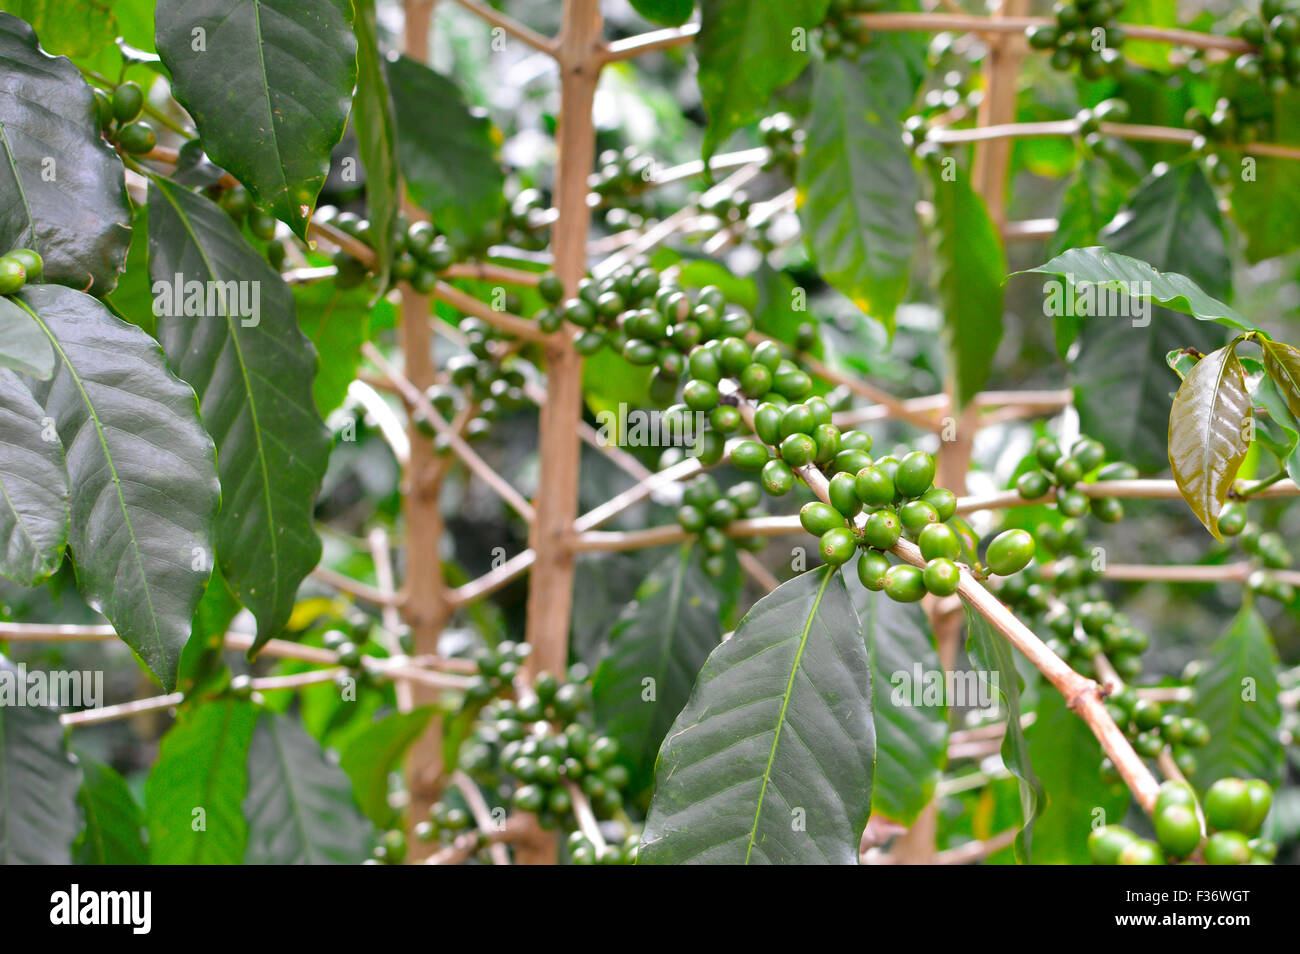 Green coffee beans in the highlands of Boquete, Chiriqui region of Panama Stock Photo